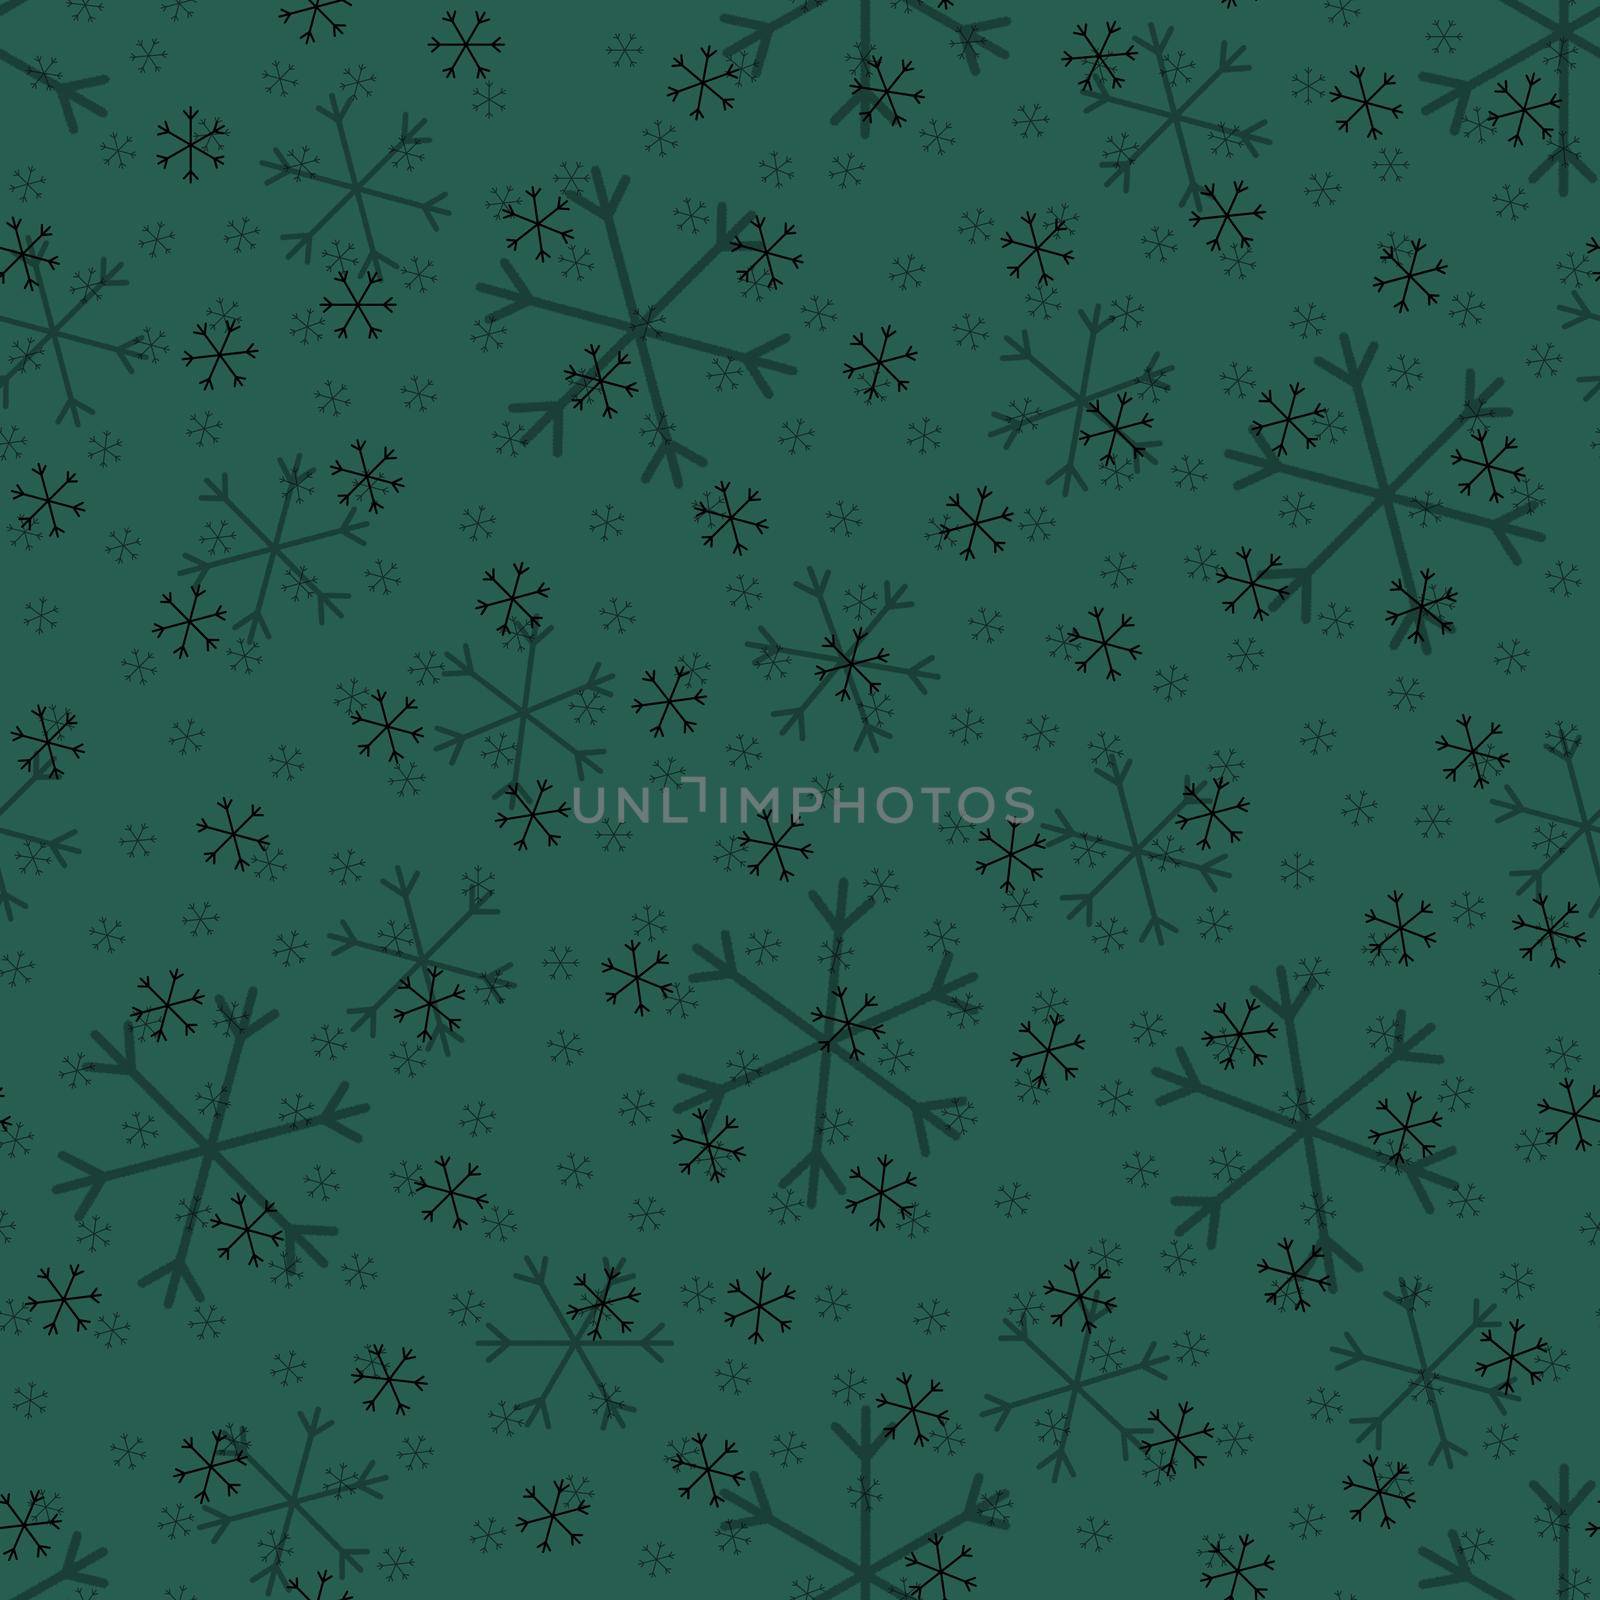 Seamless Christmas pattern doodle with hand random drawn snowflakes.Wrapping paper for presents, funny textile fabric print, design, decor, food wrap, backgrounds. new year.Raster copy.Green, black